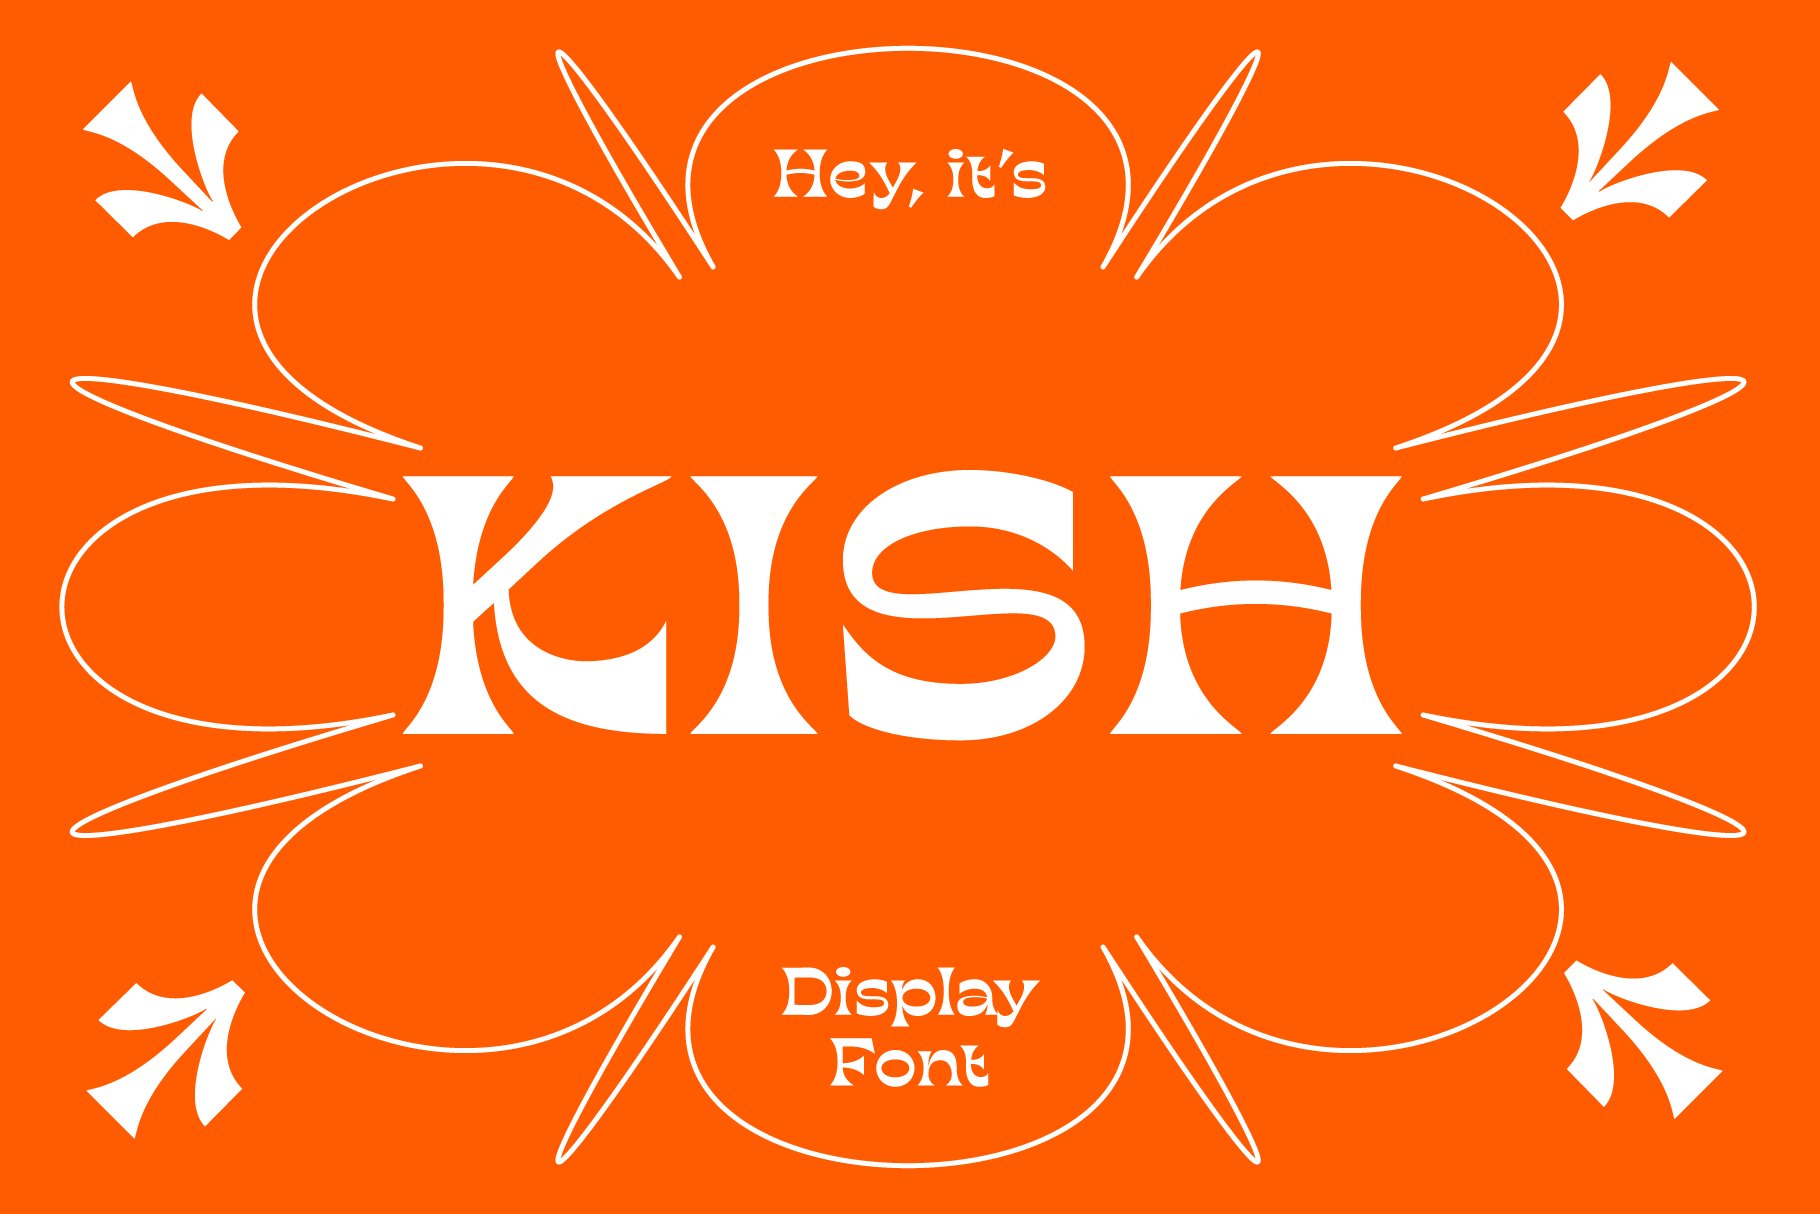 KISH - Quirky Display Type cover image.